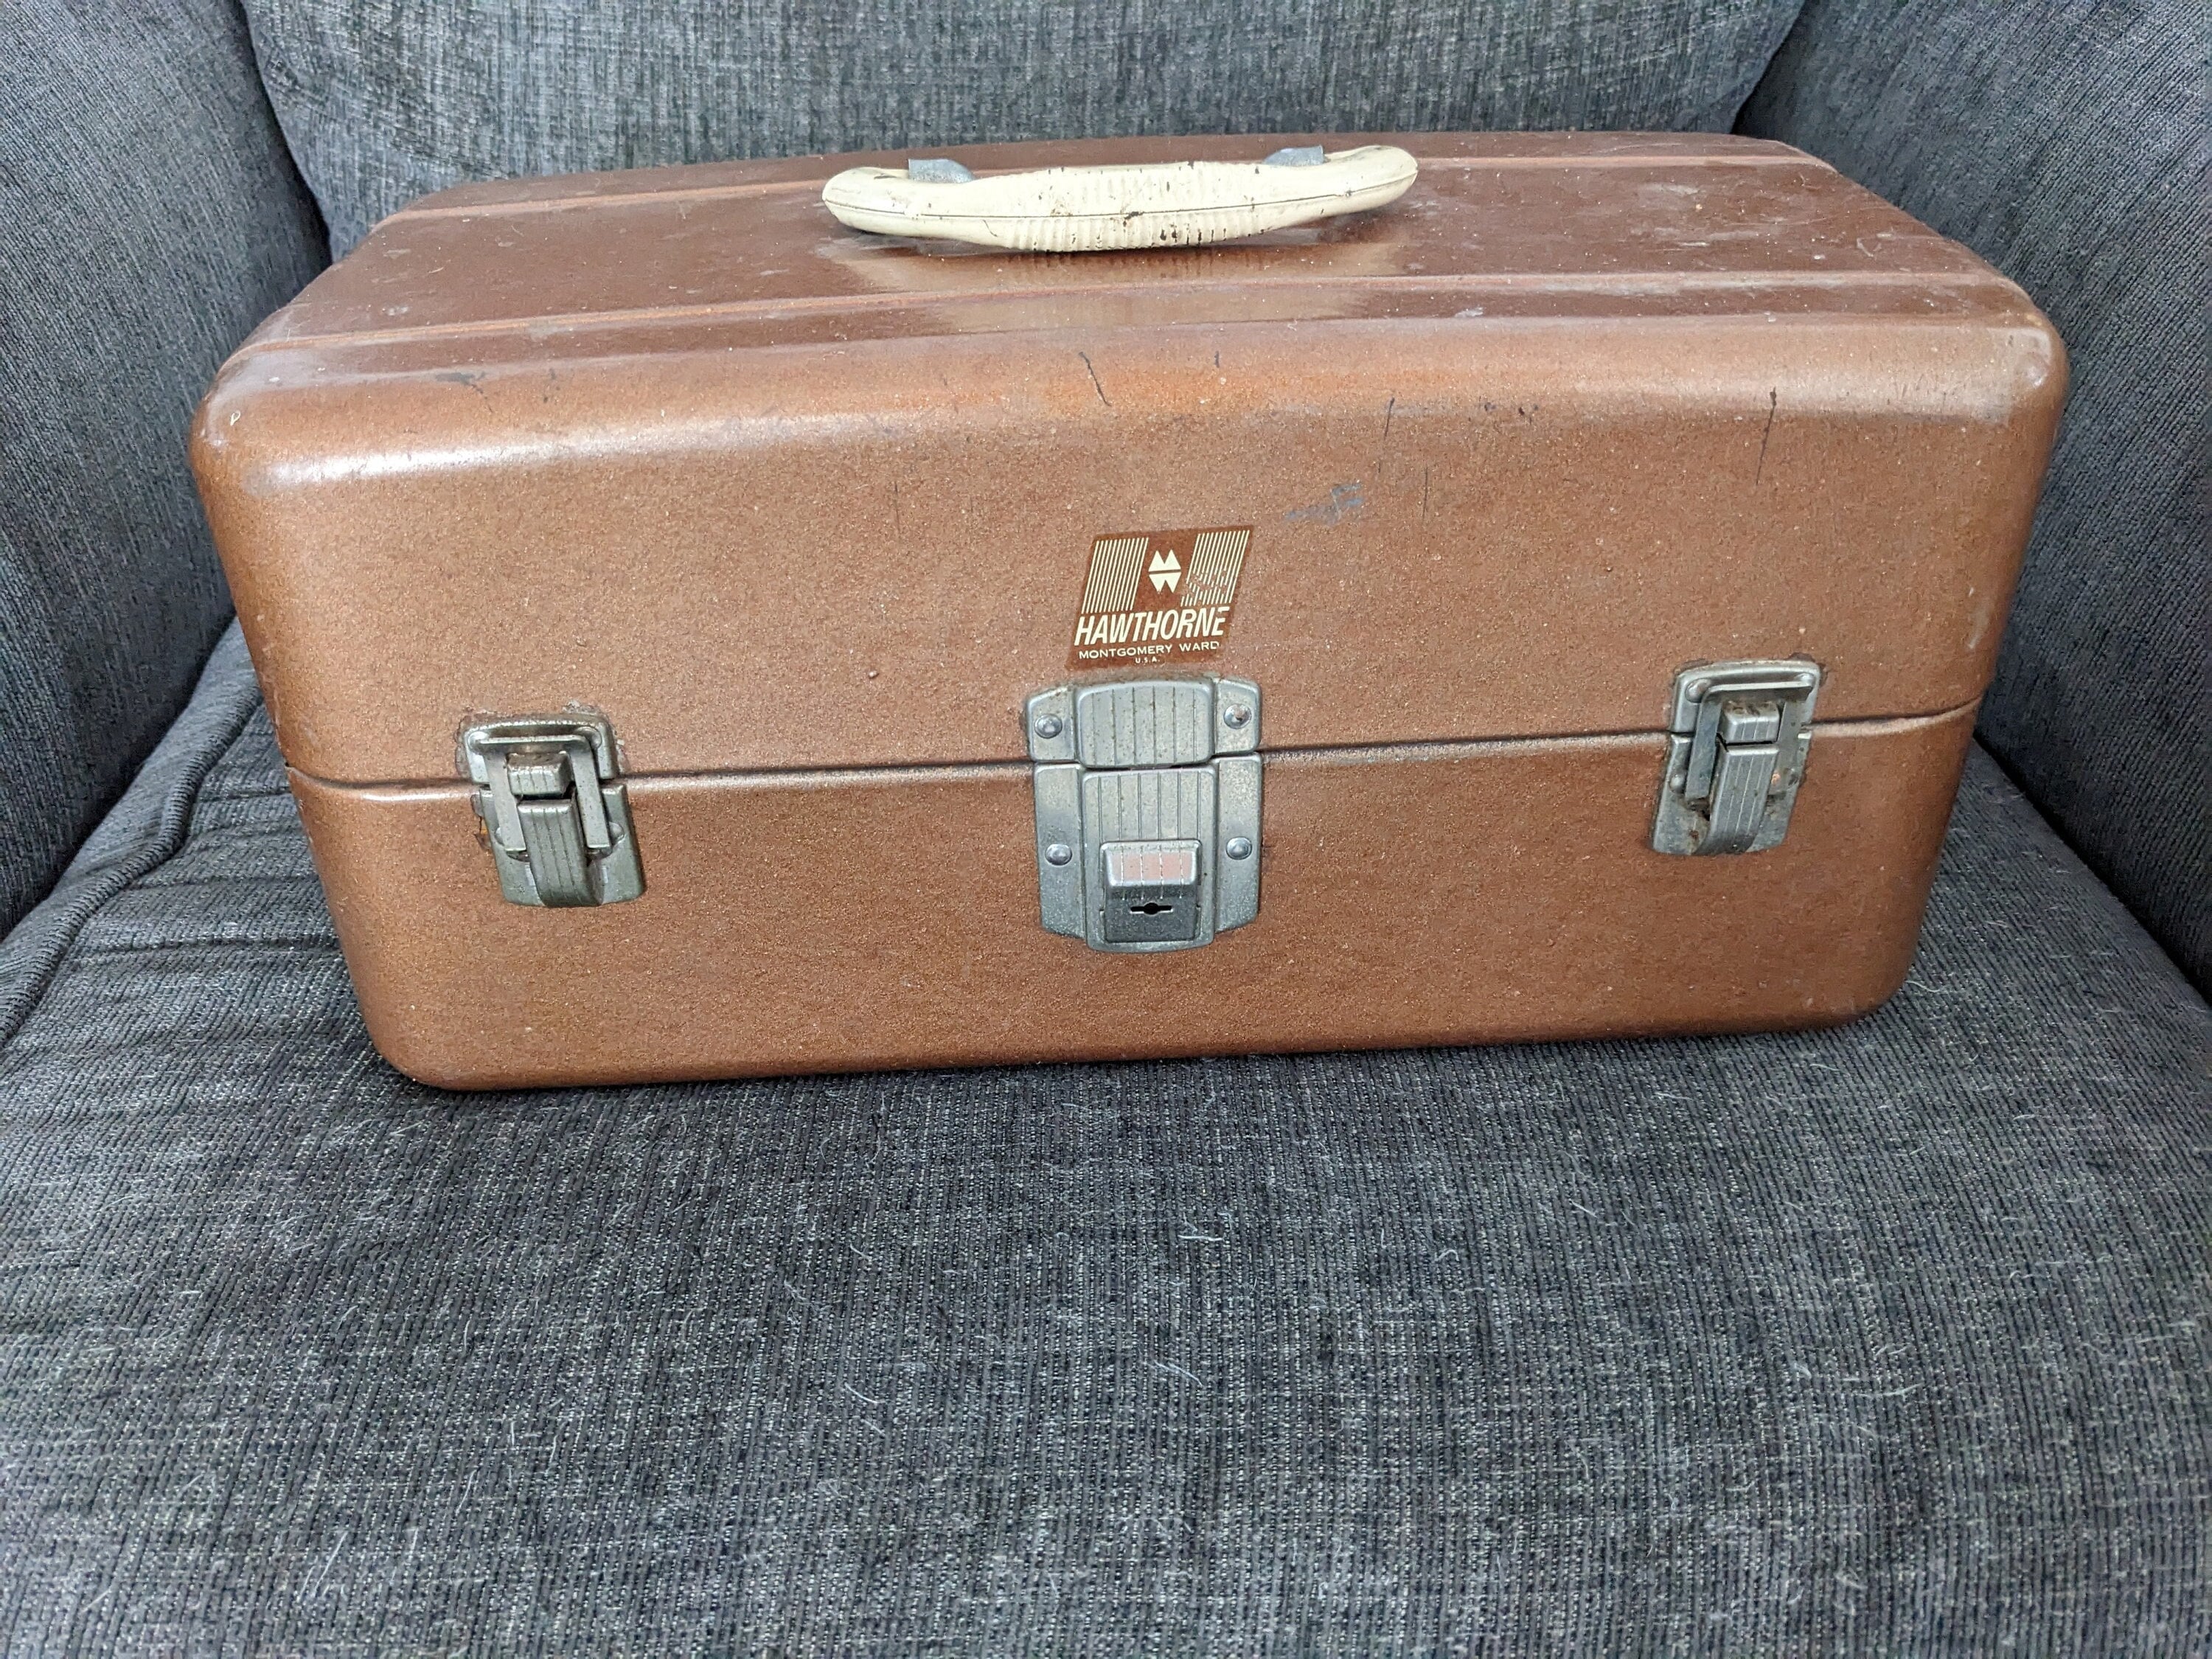 Vintage Steel Fishing Tackle Box Hawthorne Brand by Montgomery Ward 